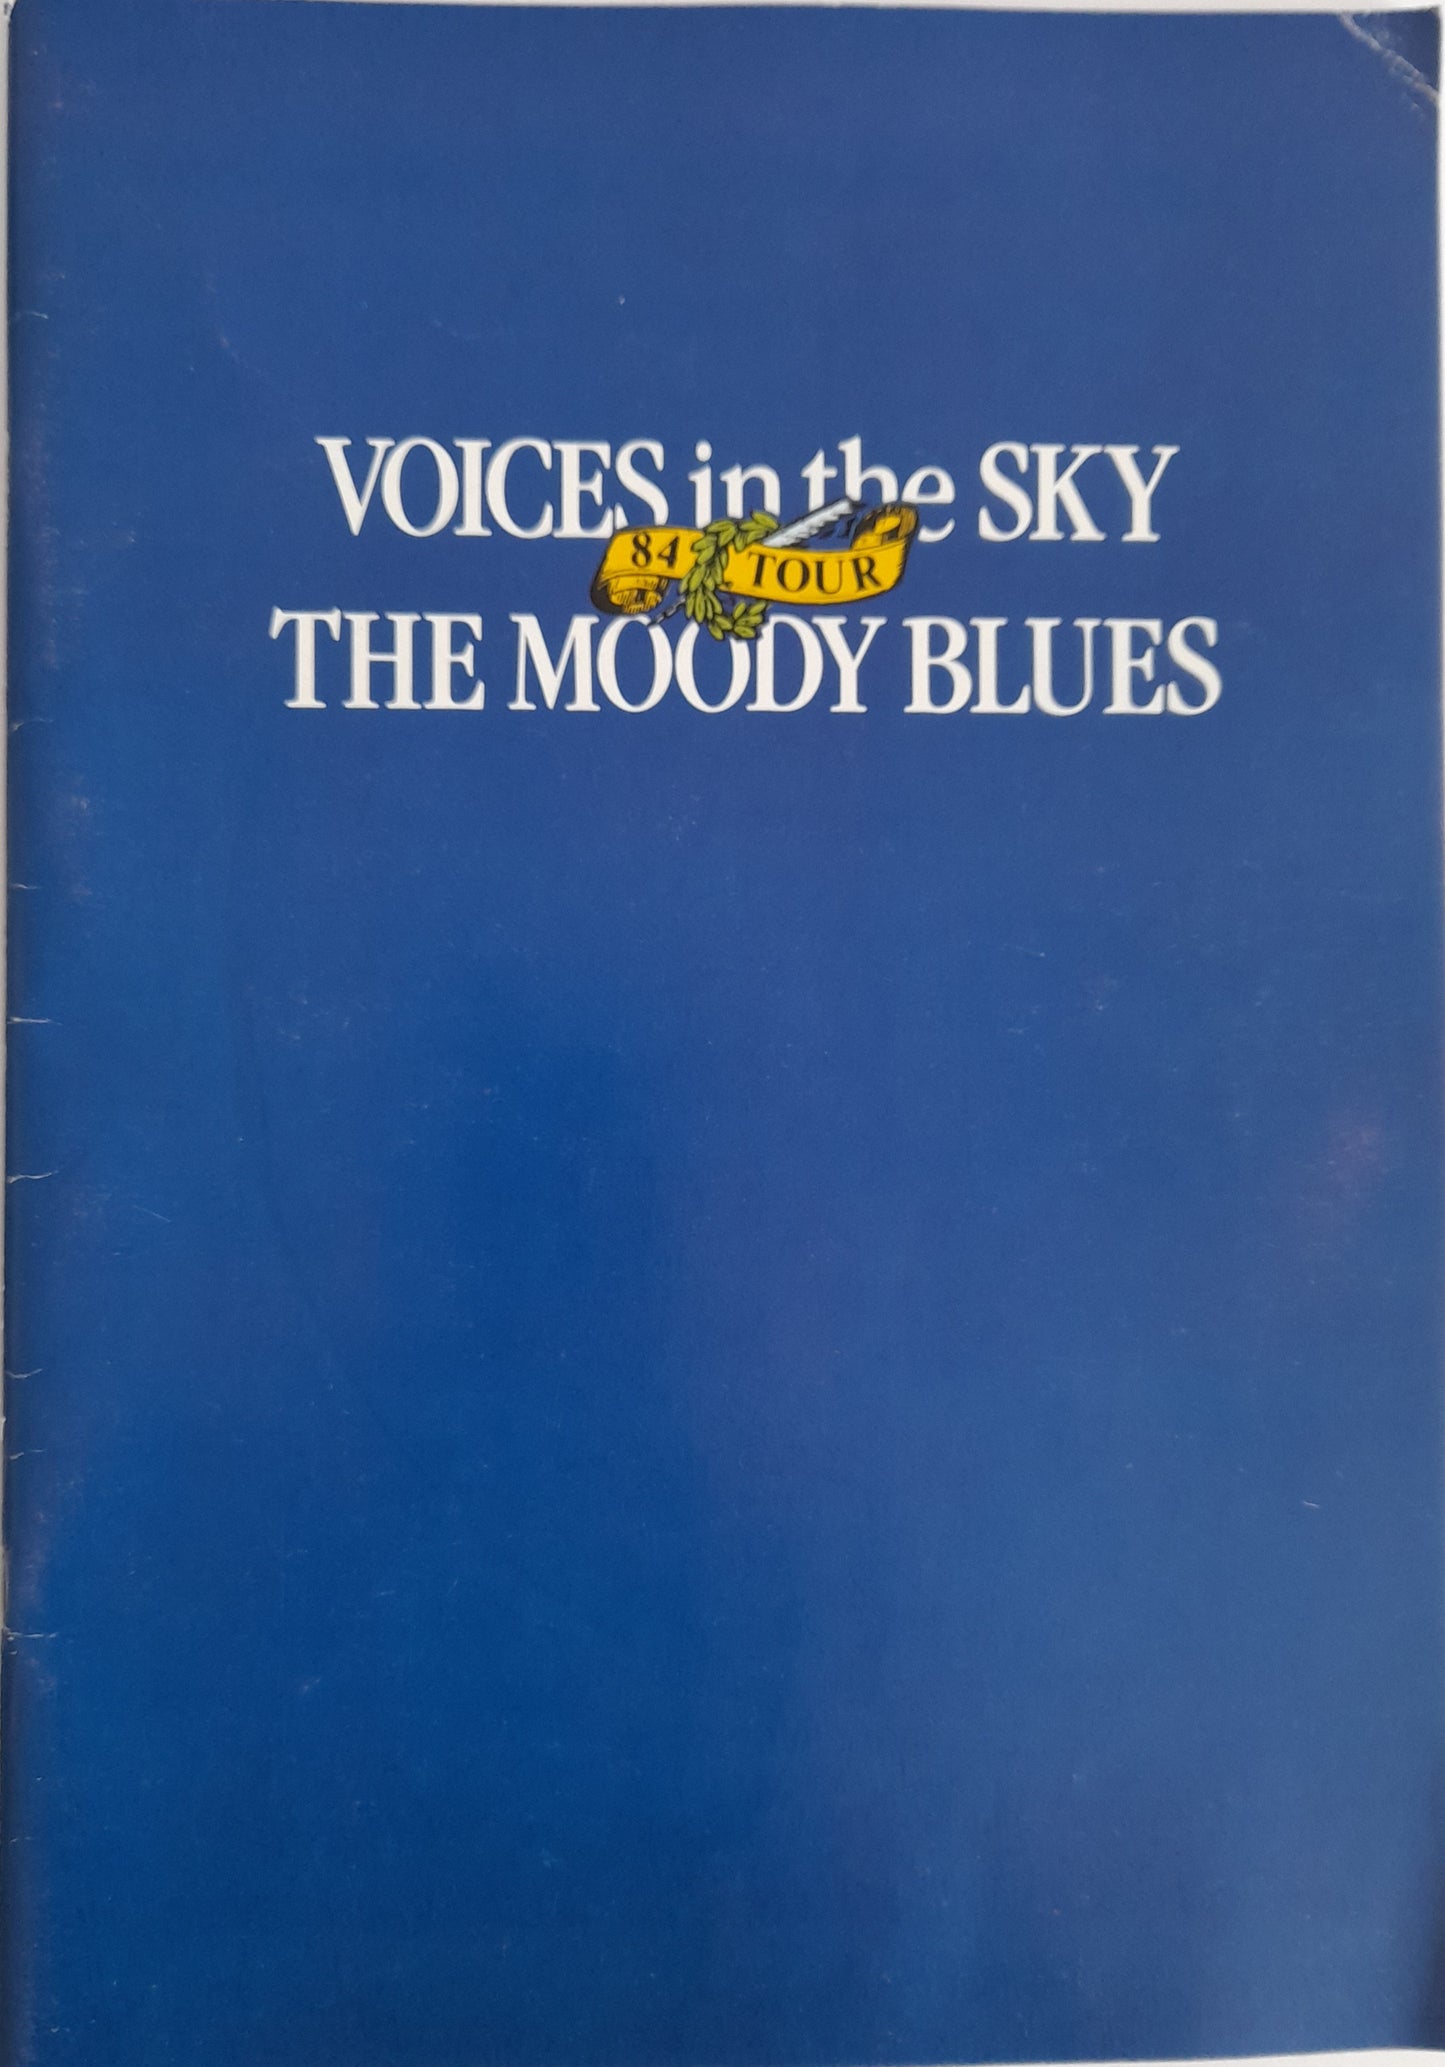 The Moody Blues Voices in the Sky Tour Programme 1984